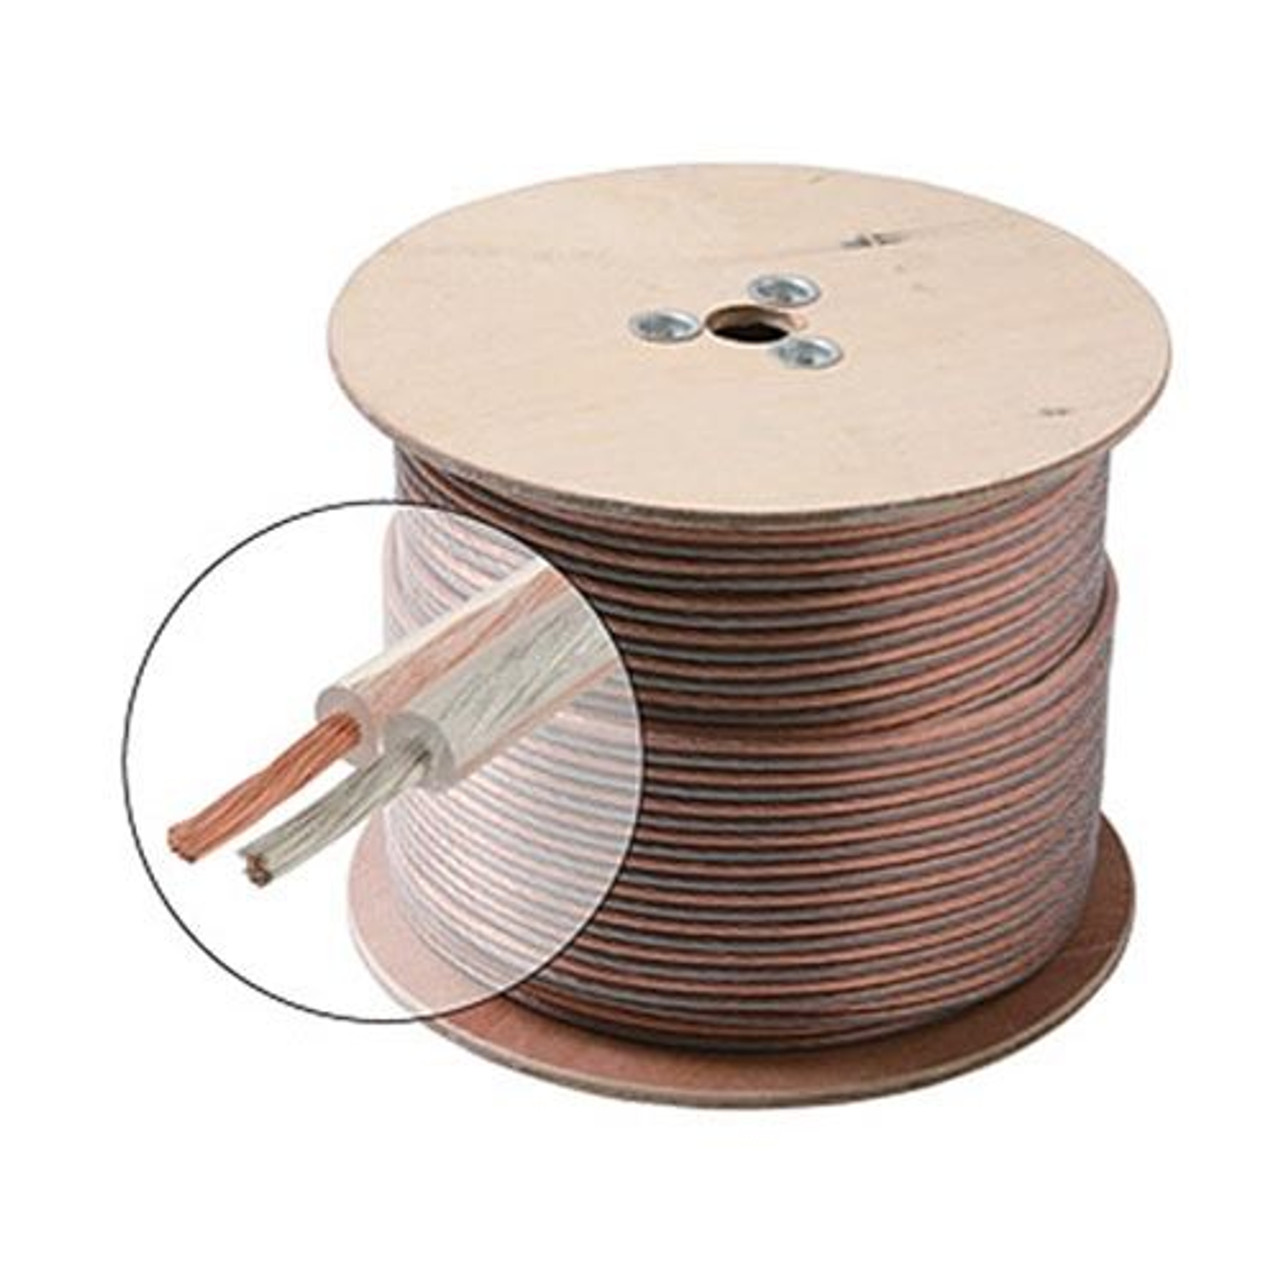 Eagle 500' FT 16 AWG GA 2 Conductor Speaker Cable Wire Clear Oxygen Free Ultra Flexible Python Copper 16-2 Jacket Audio Speaker Cable Stranded 2 Conductor Polarized 2-Wire Speaker Cable